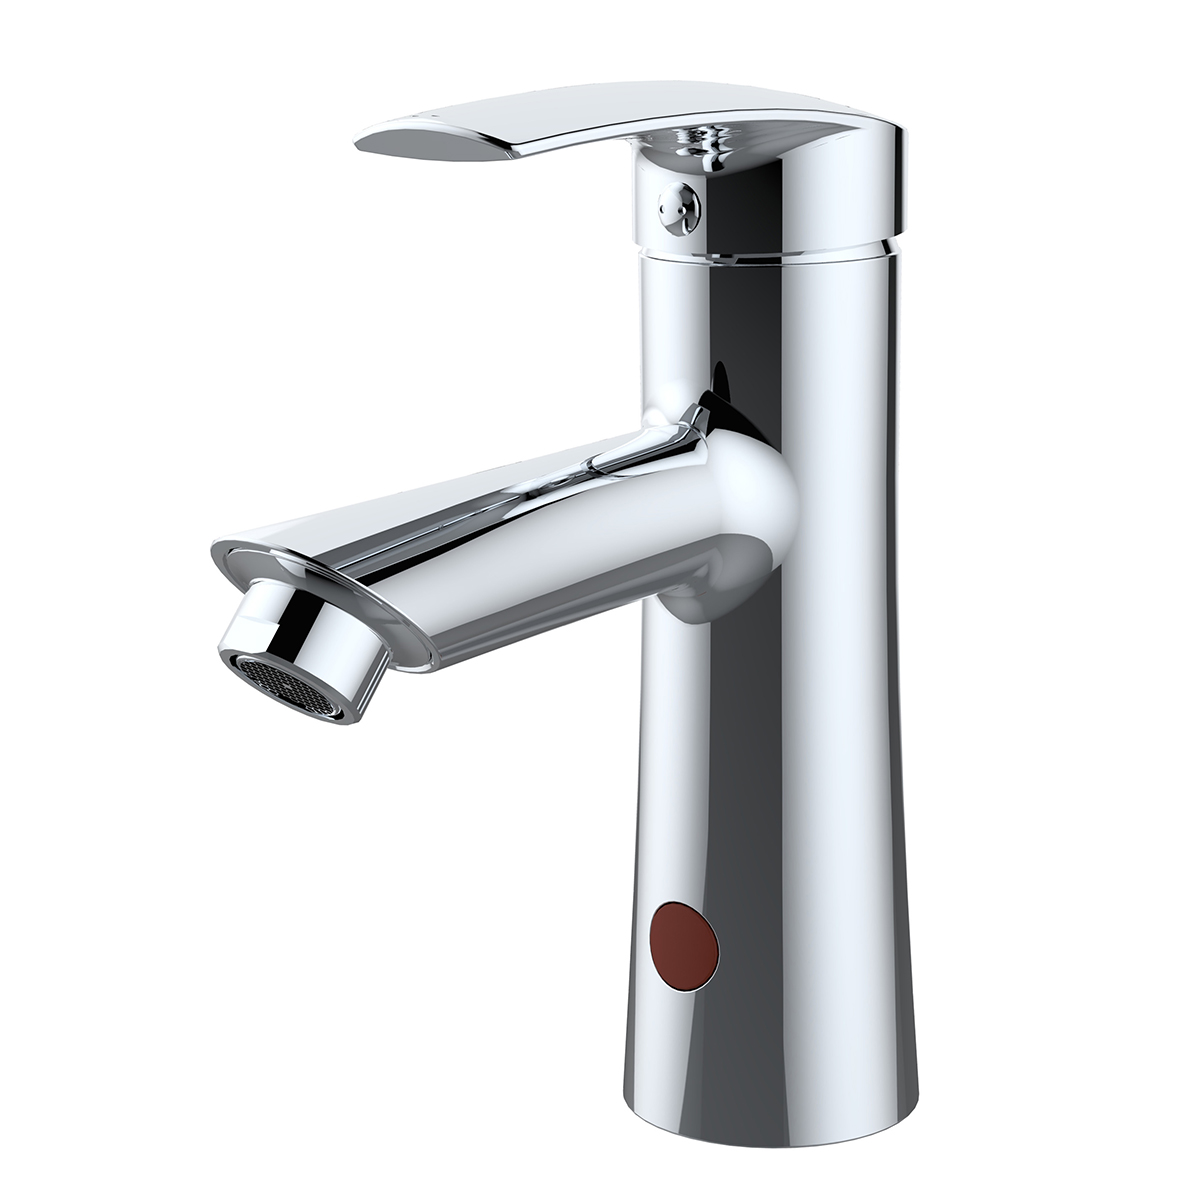 Motion Activated Hands Free Automatic Touchless Sensor Bathroom Faucet